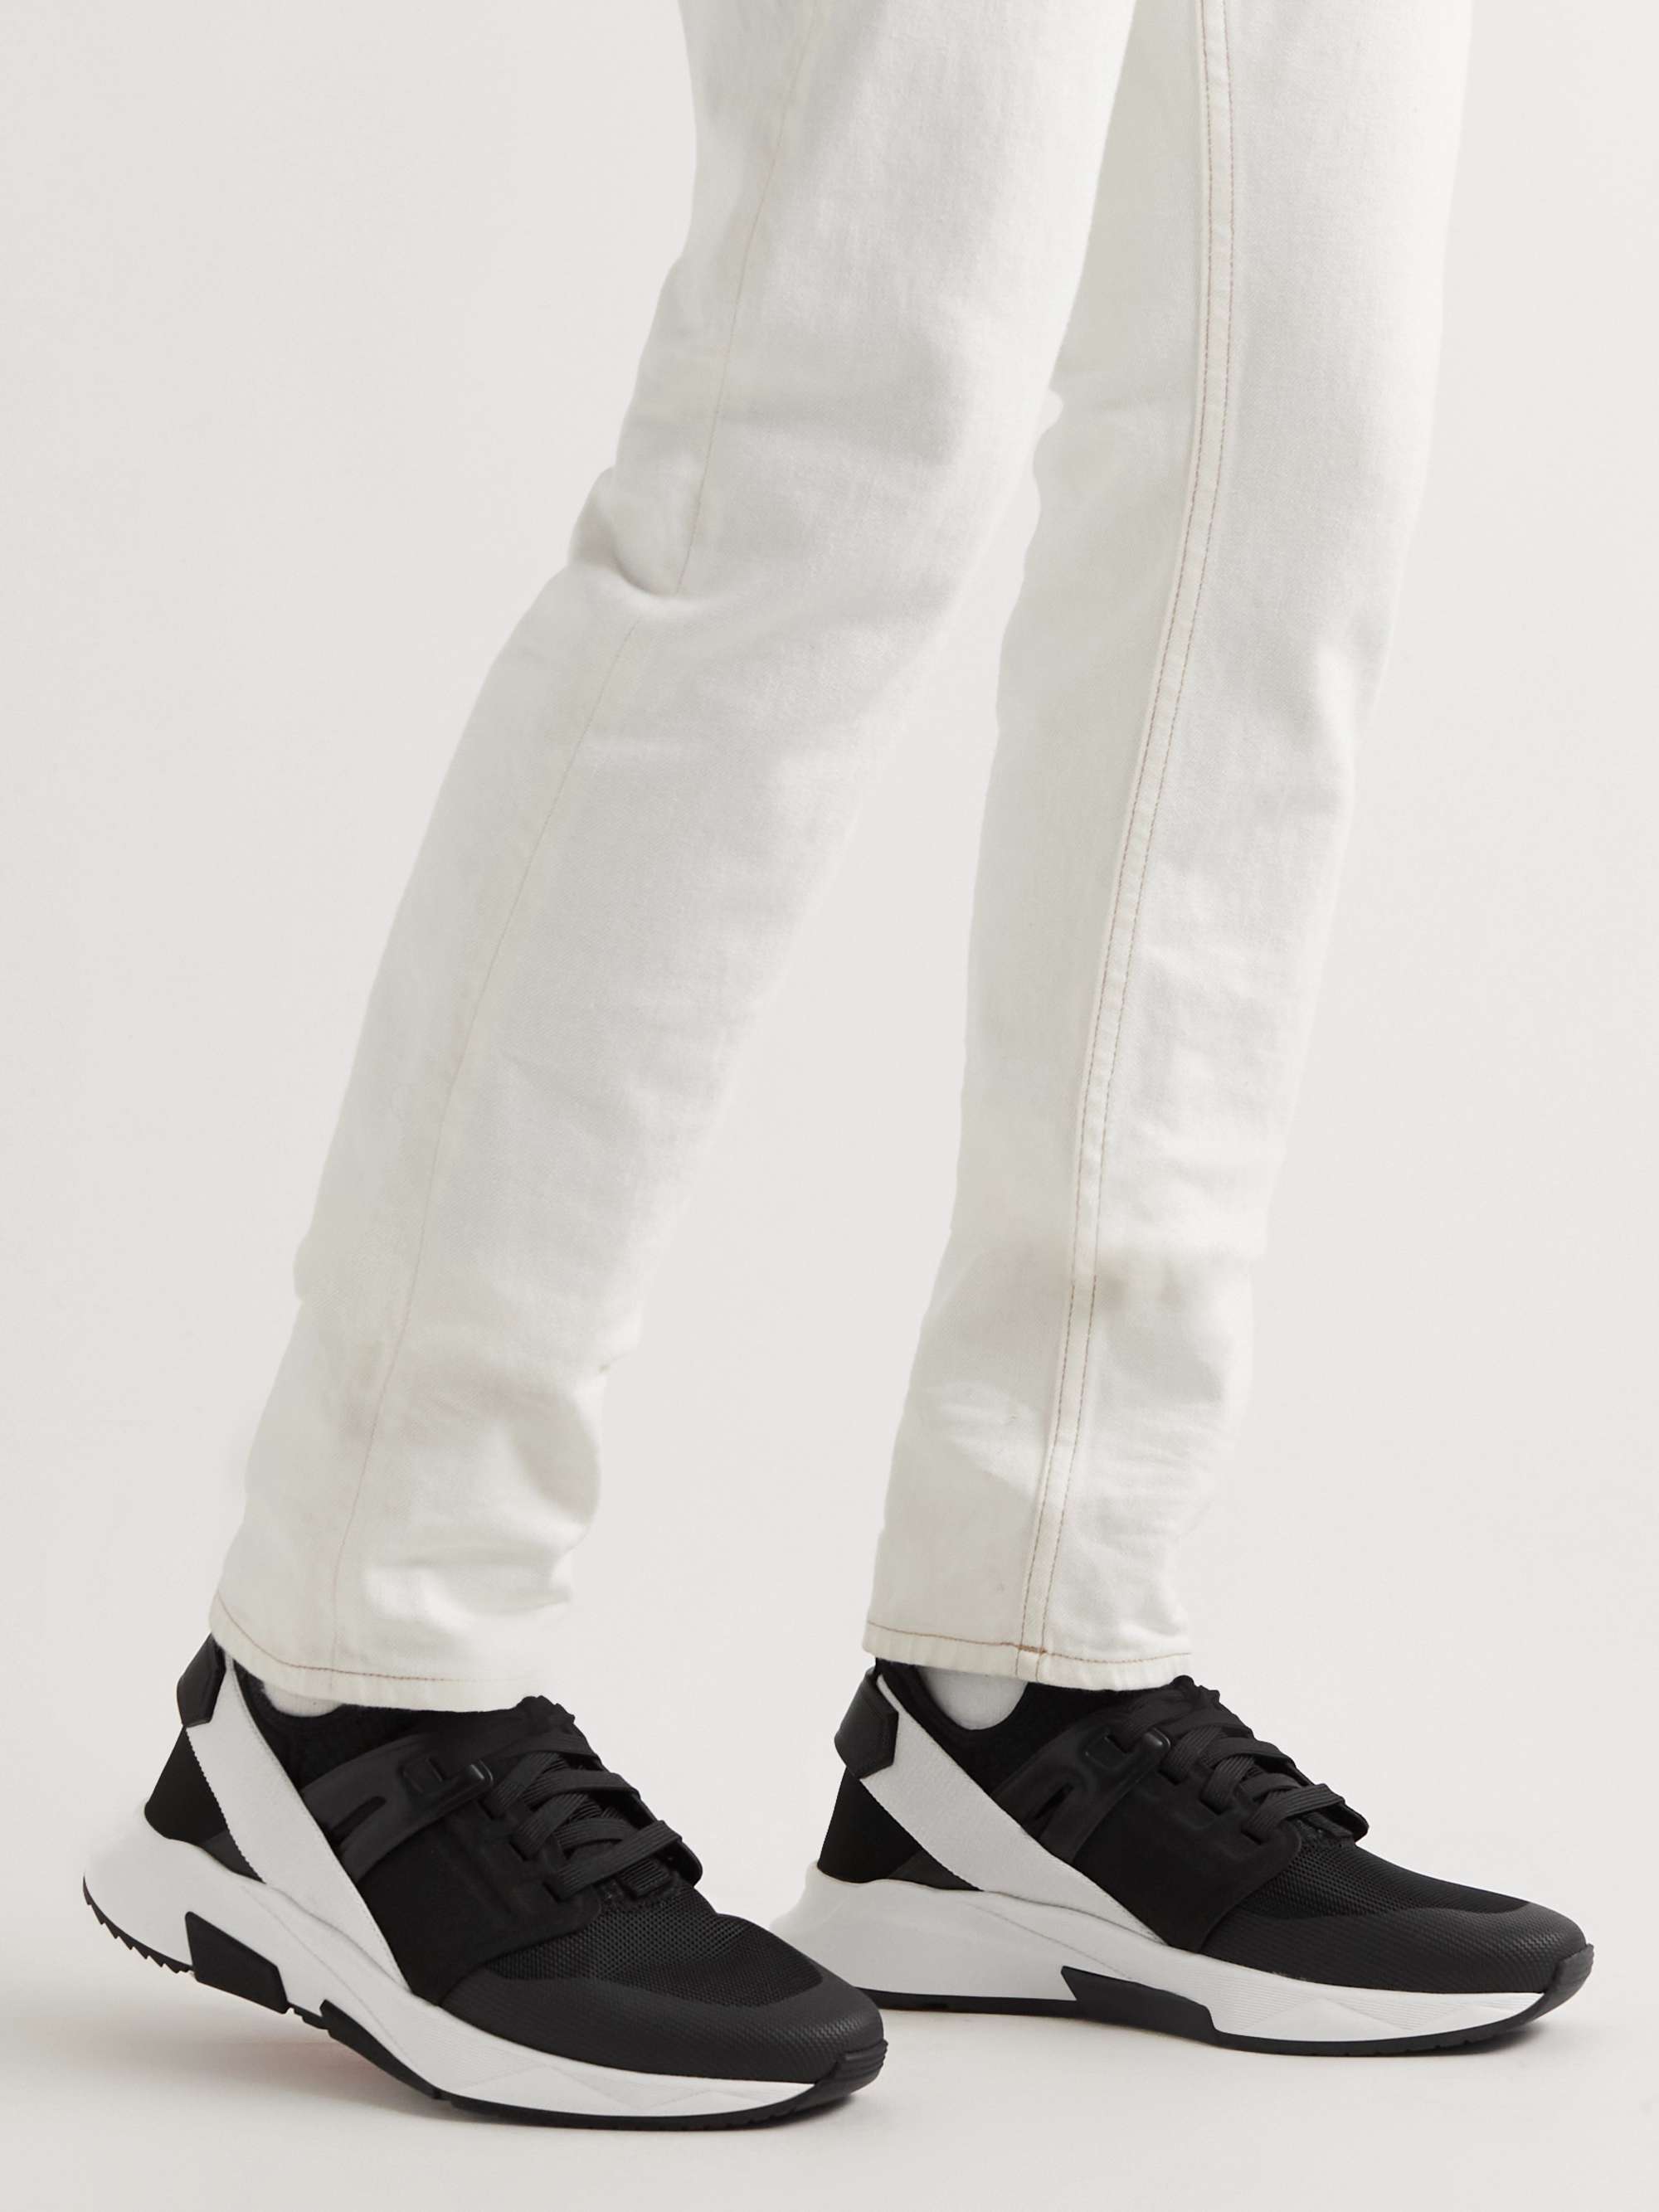 TOM FORD Jago Leather-Trimmed Nylon, Mesh and Suede Sneakers